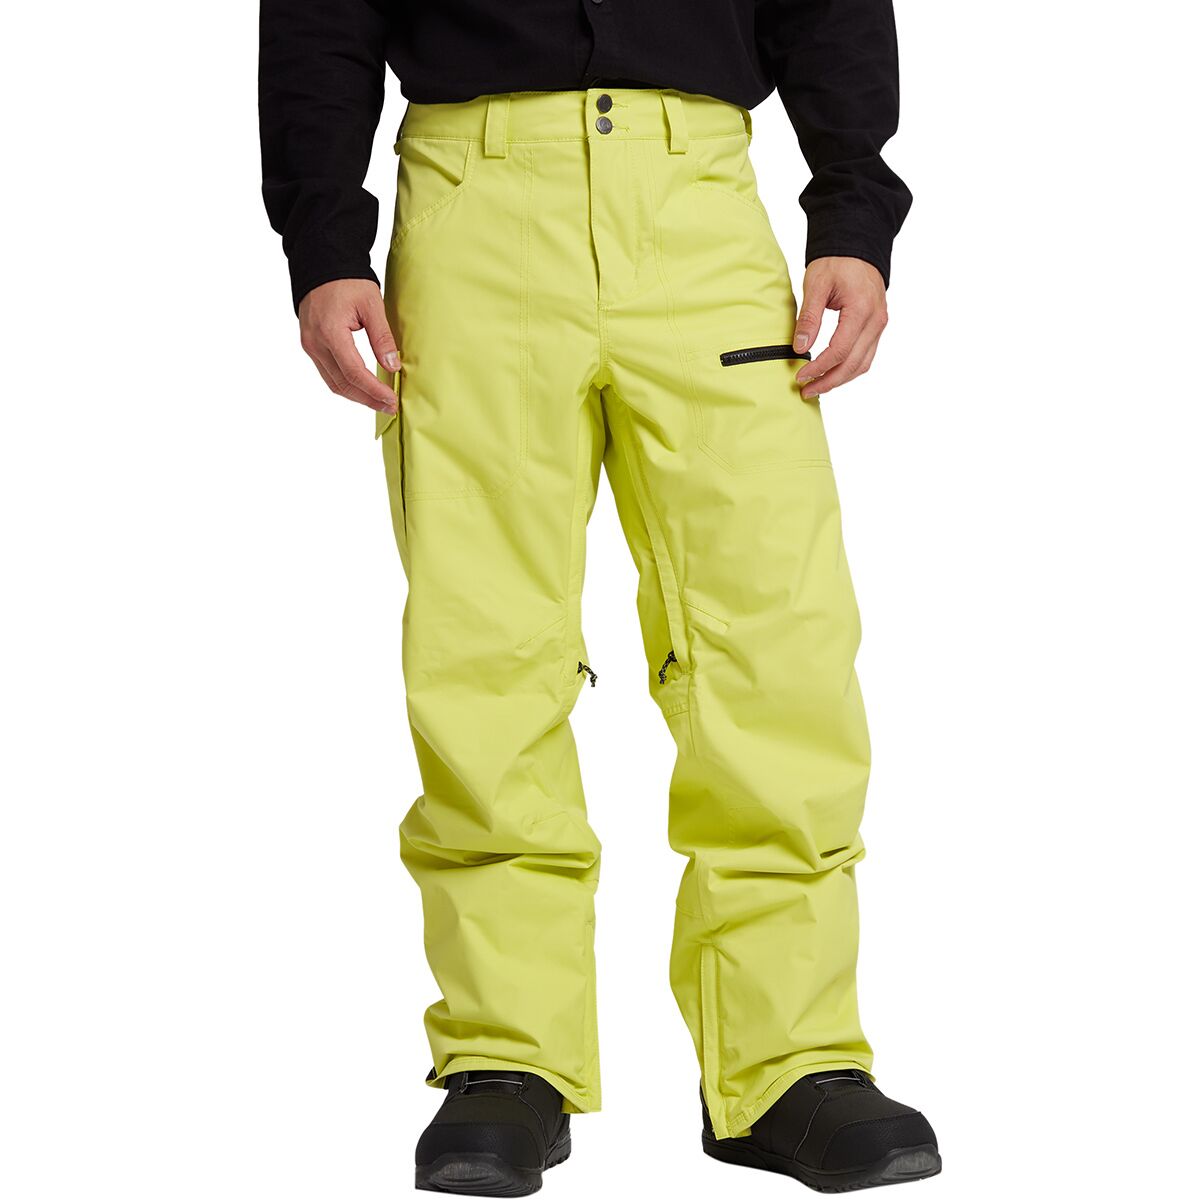 Covert Insulated Pant - Men